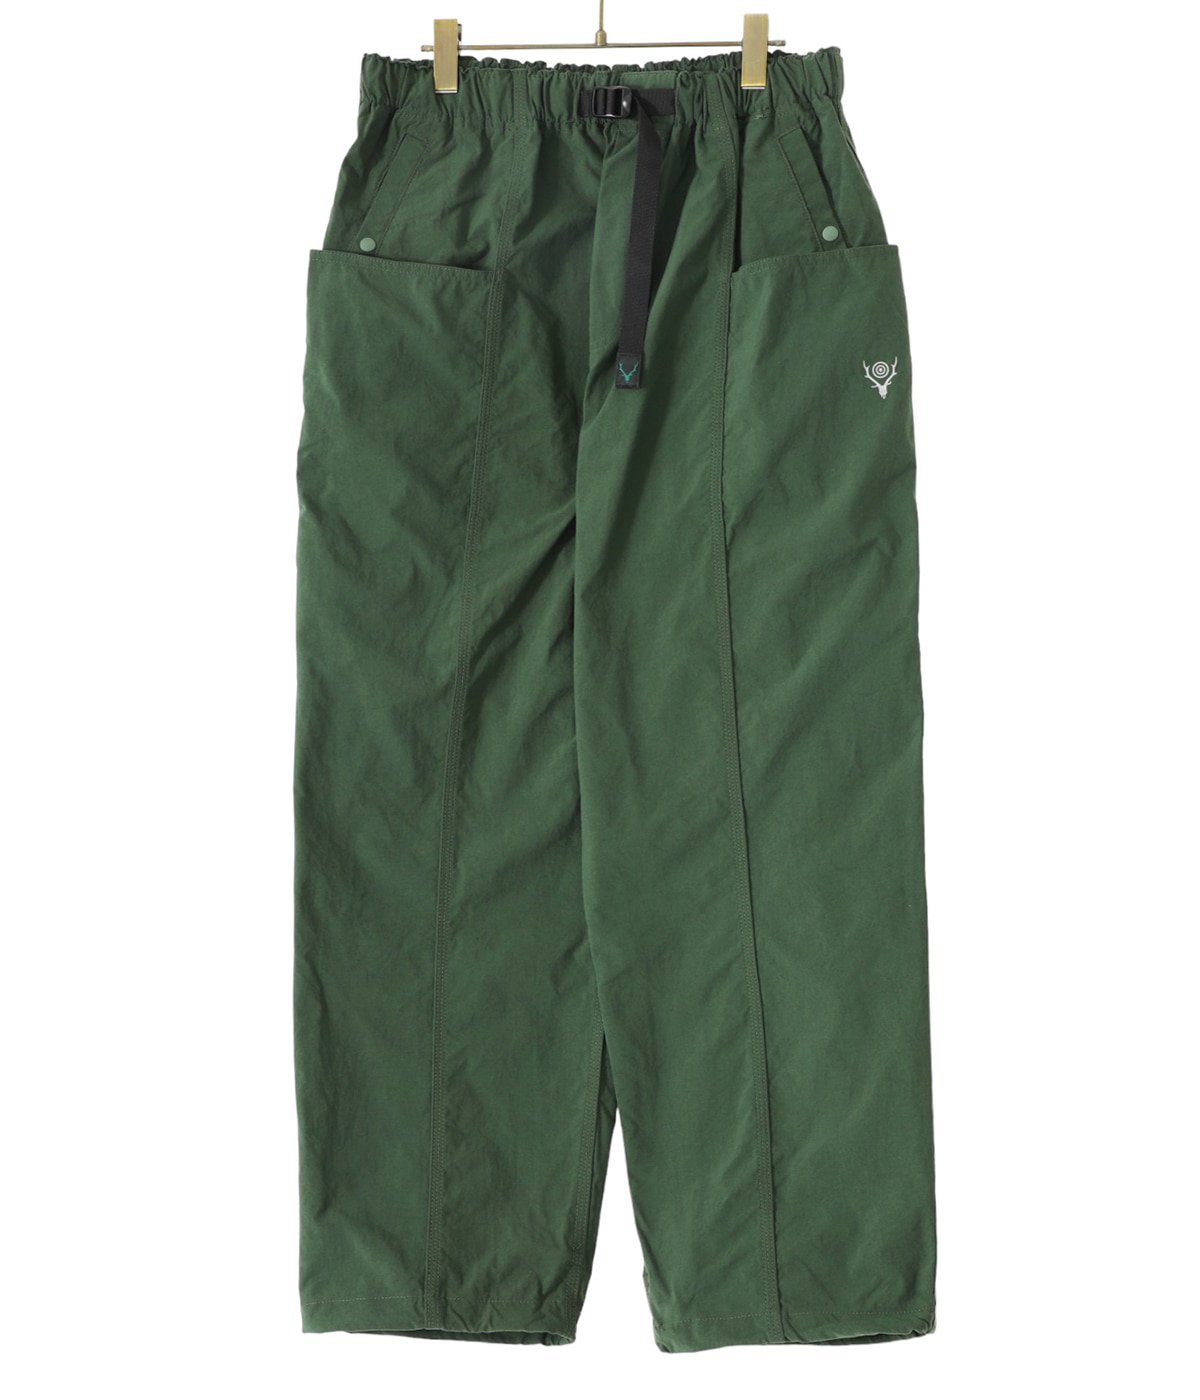 Belted C.S. Pant - Nylon Ox ford | South2 West8(サウスツーウエスト